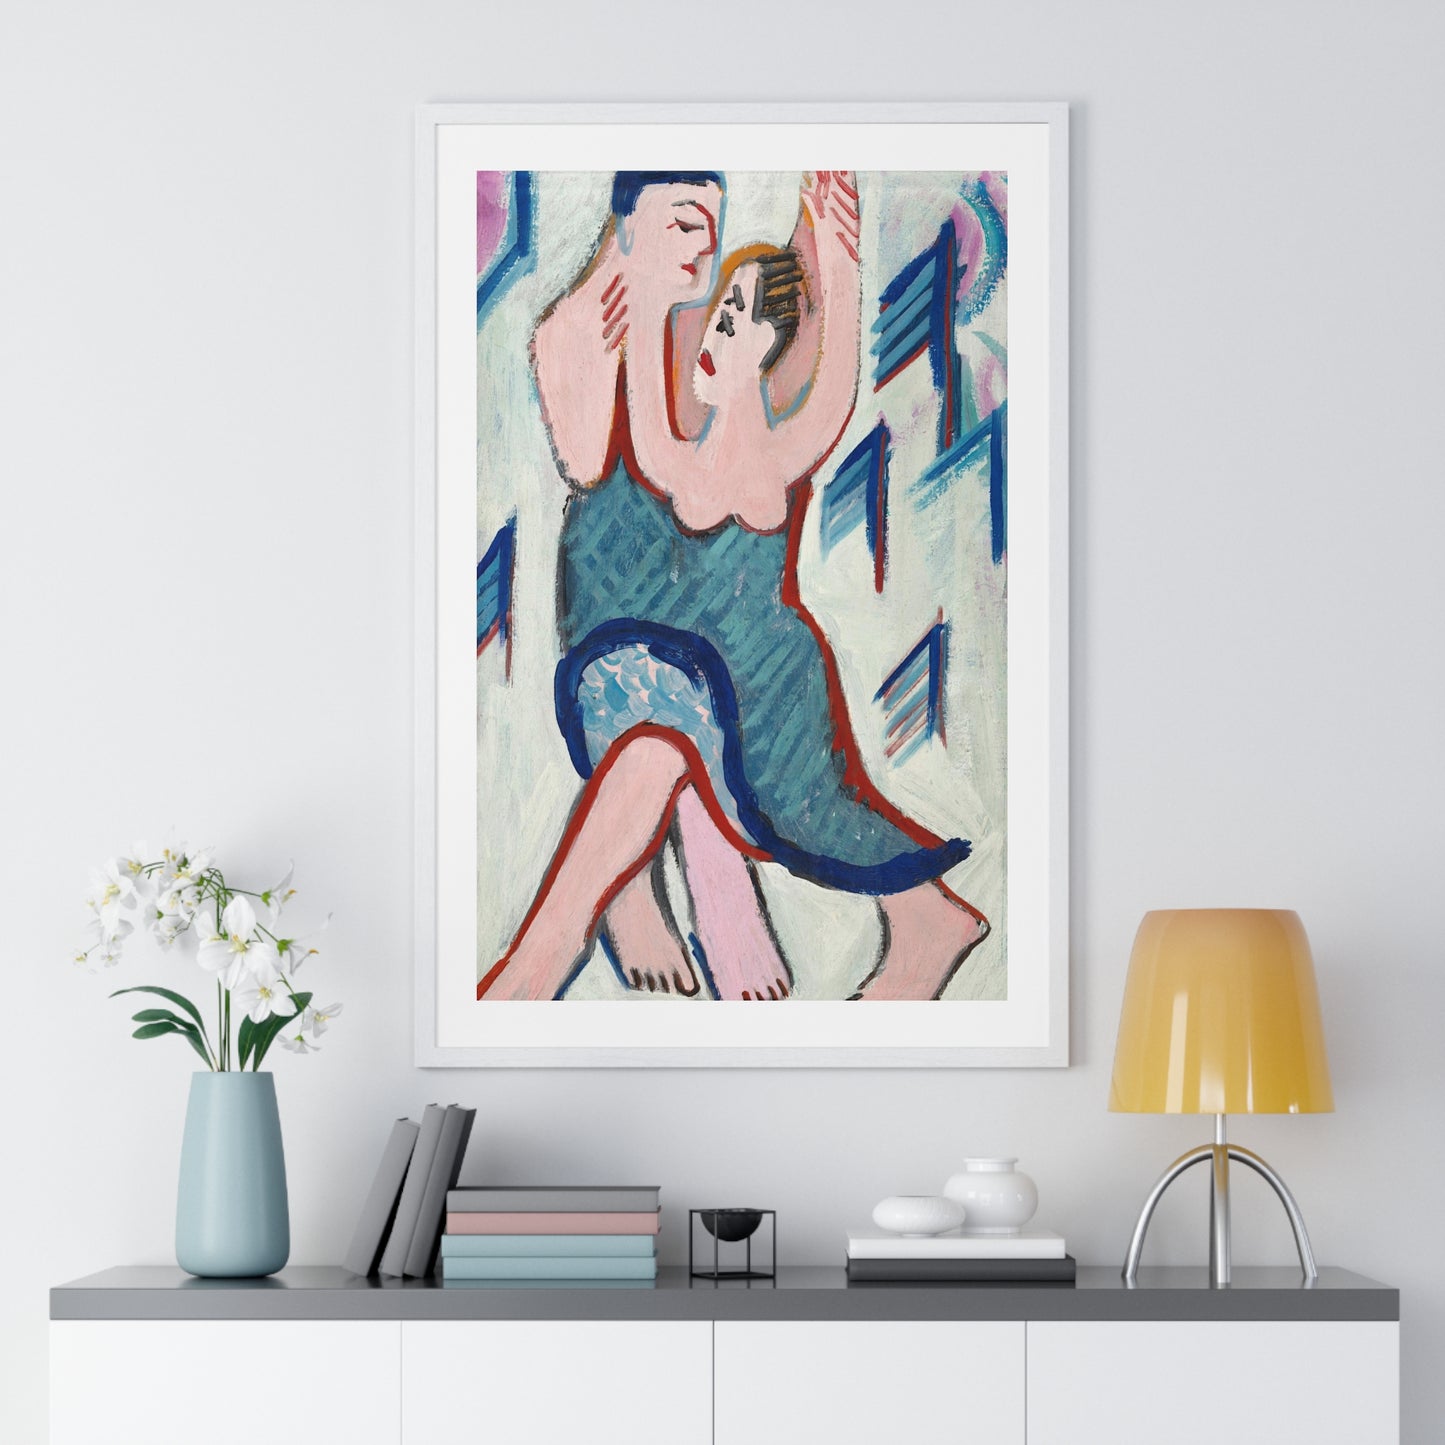 Dancing Couple in the Snow [reverse] by Ernst Ludwig Kirchner (1928–1929) from the Original, Framed Art Print